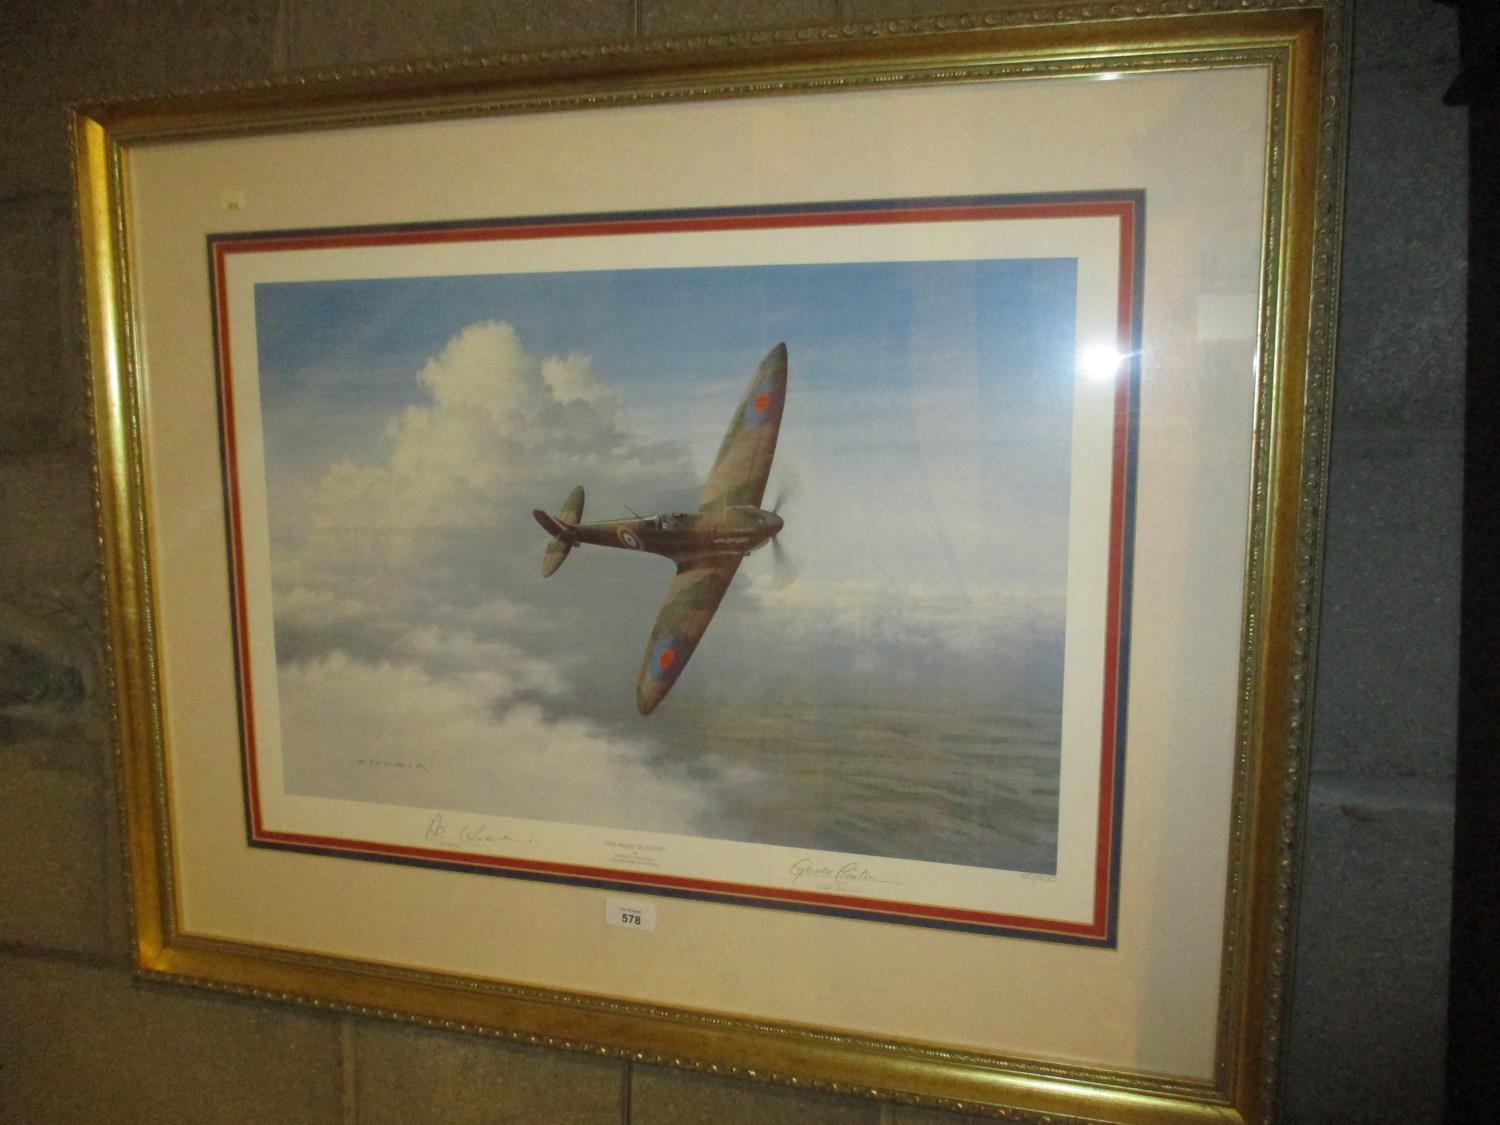 Gerald Coulson Signed Print The Magic of Flight, also Signed by Alex Henshaw, 160/500